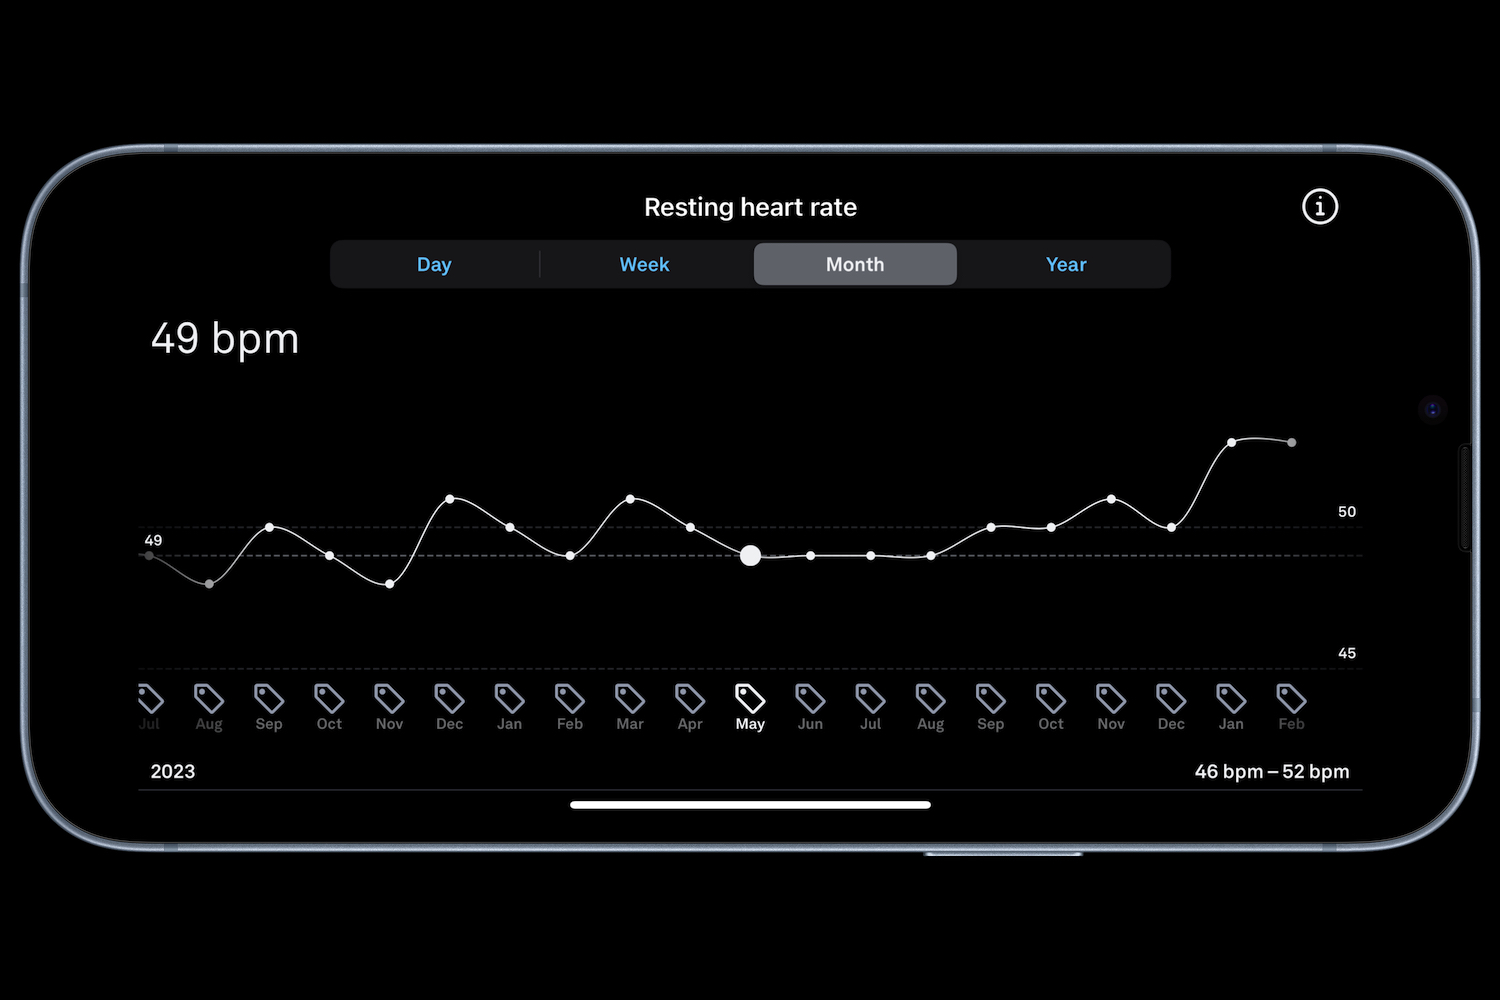 A screenshot from the Oura Ring app showing resting heart rate data.